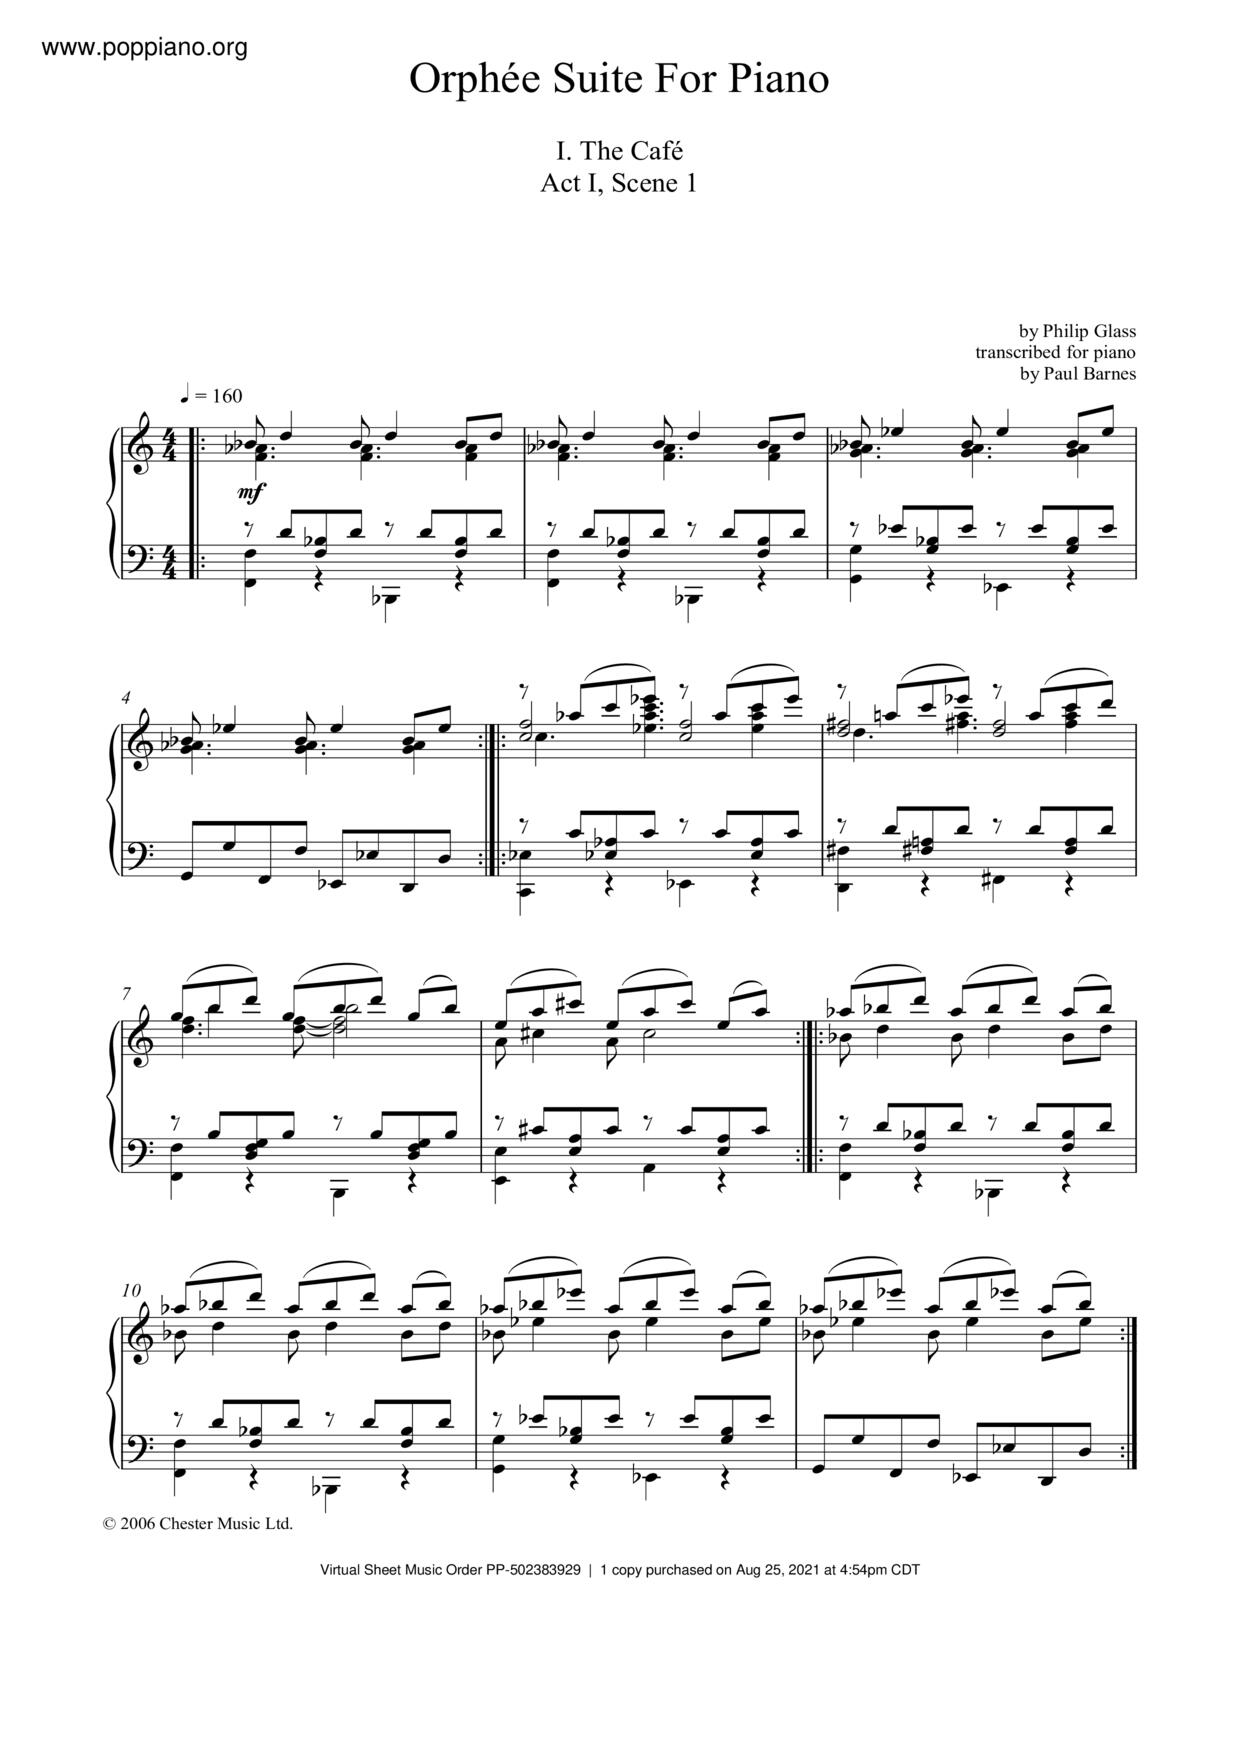 Orphee Suite For Piano, I. The Cafe, Act I, Scene 1 Score